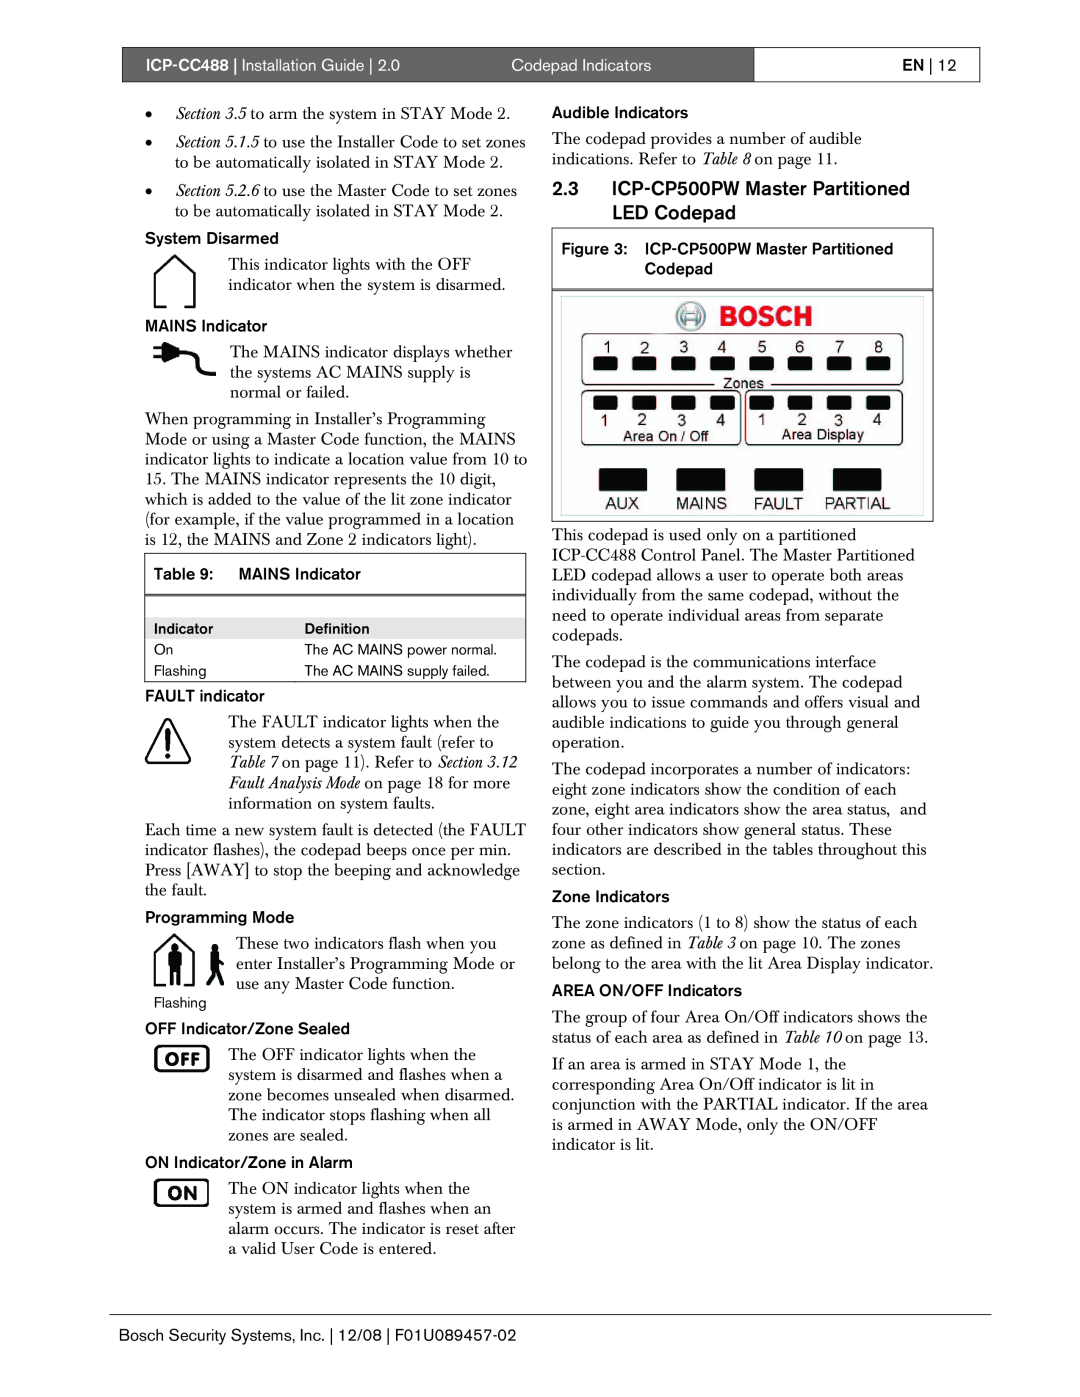 Bosch Appliances manual 2.3ICP-CP500PWMaster Partitioned LED Codepad, ICP-CC488| Installation Guide, Codepad Indicators 